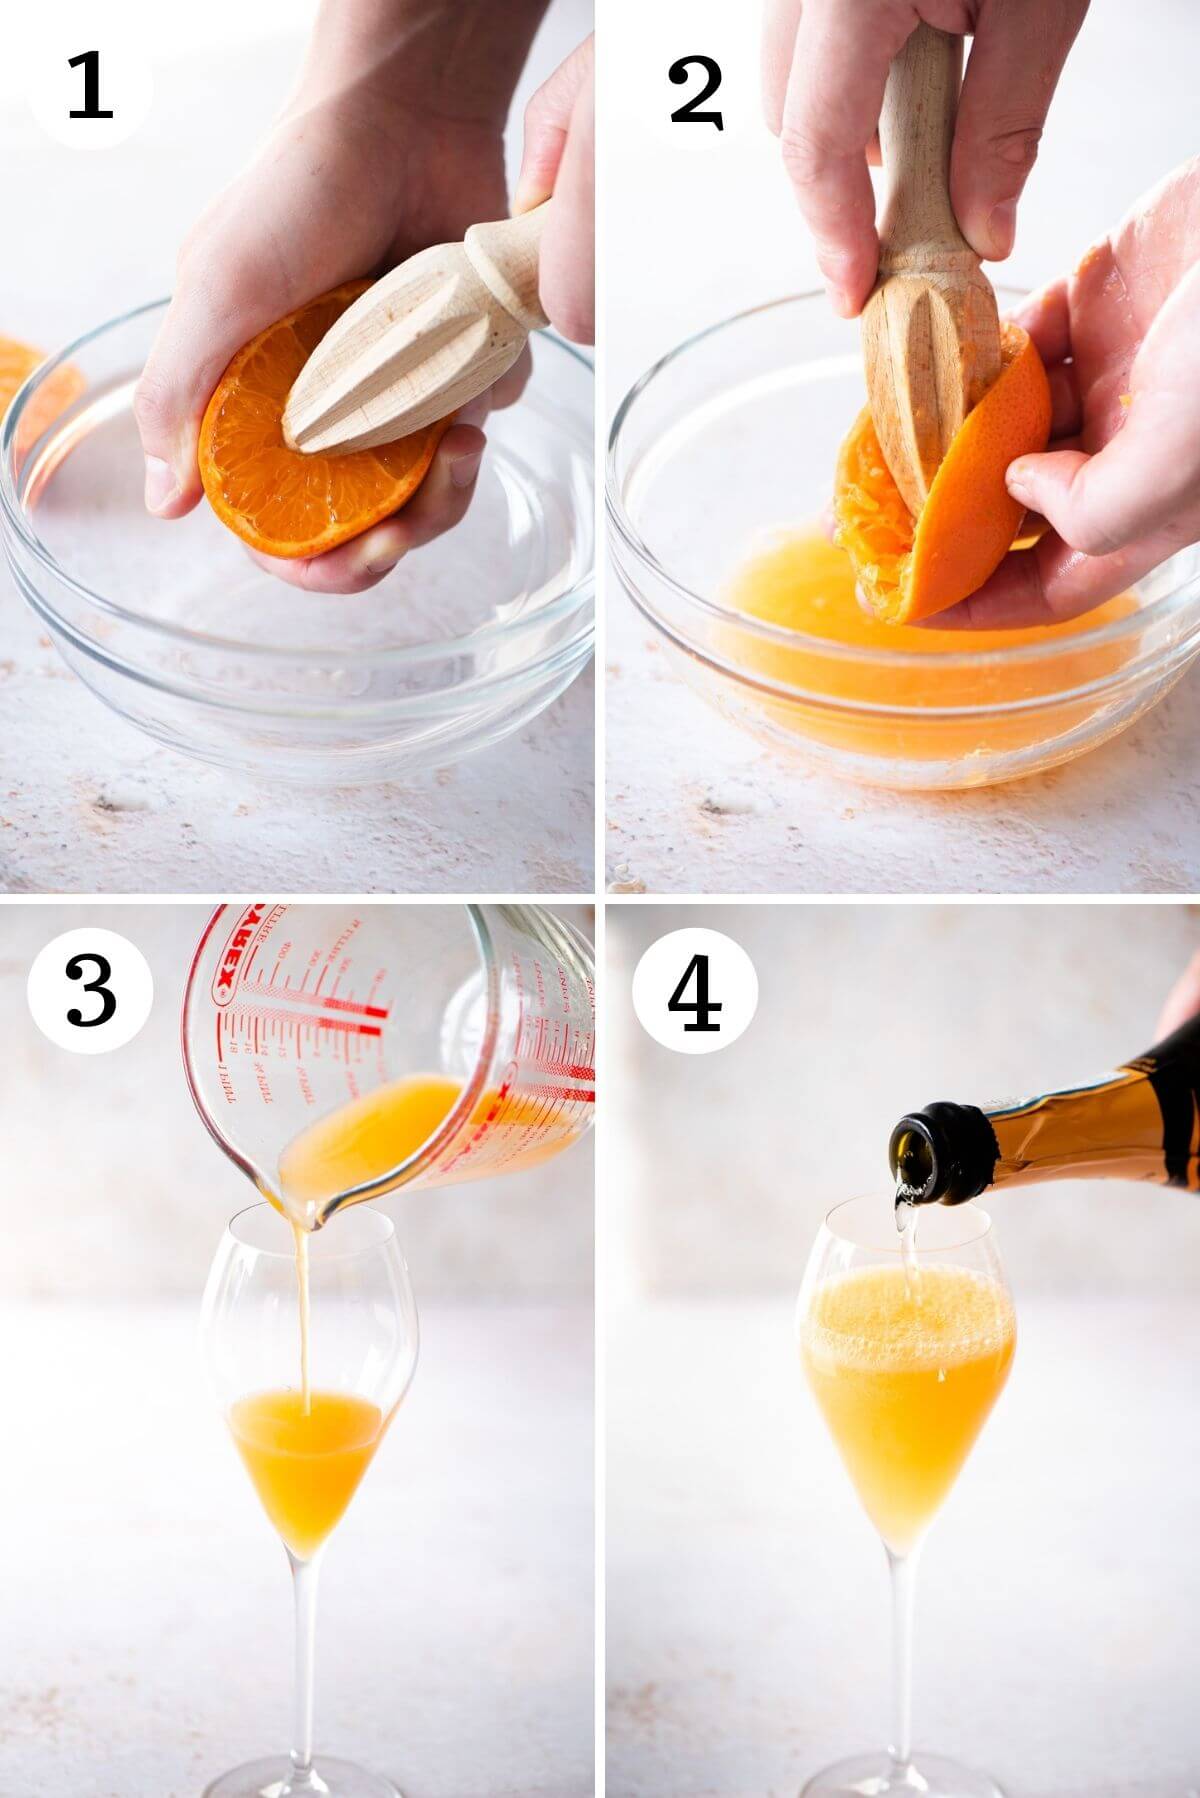 Step by step photos showing how to make a Puccini cocktail